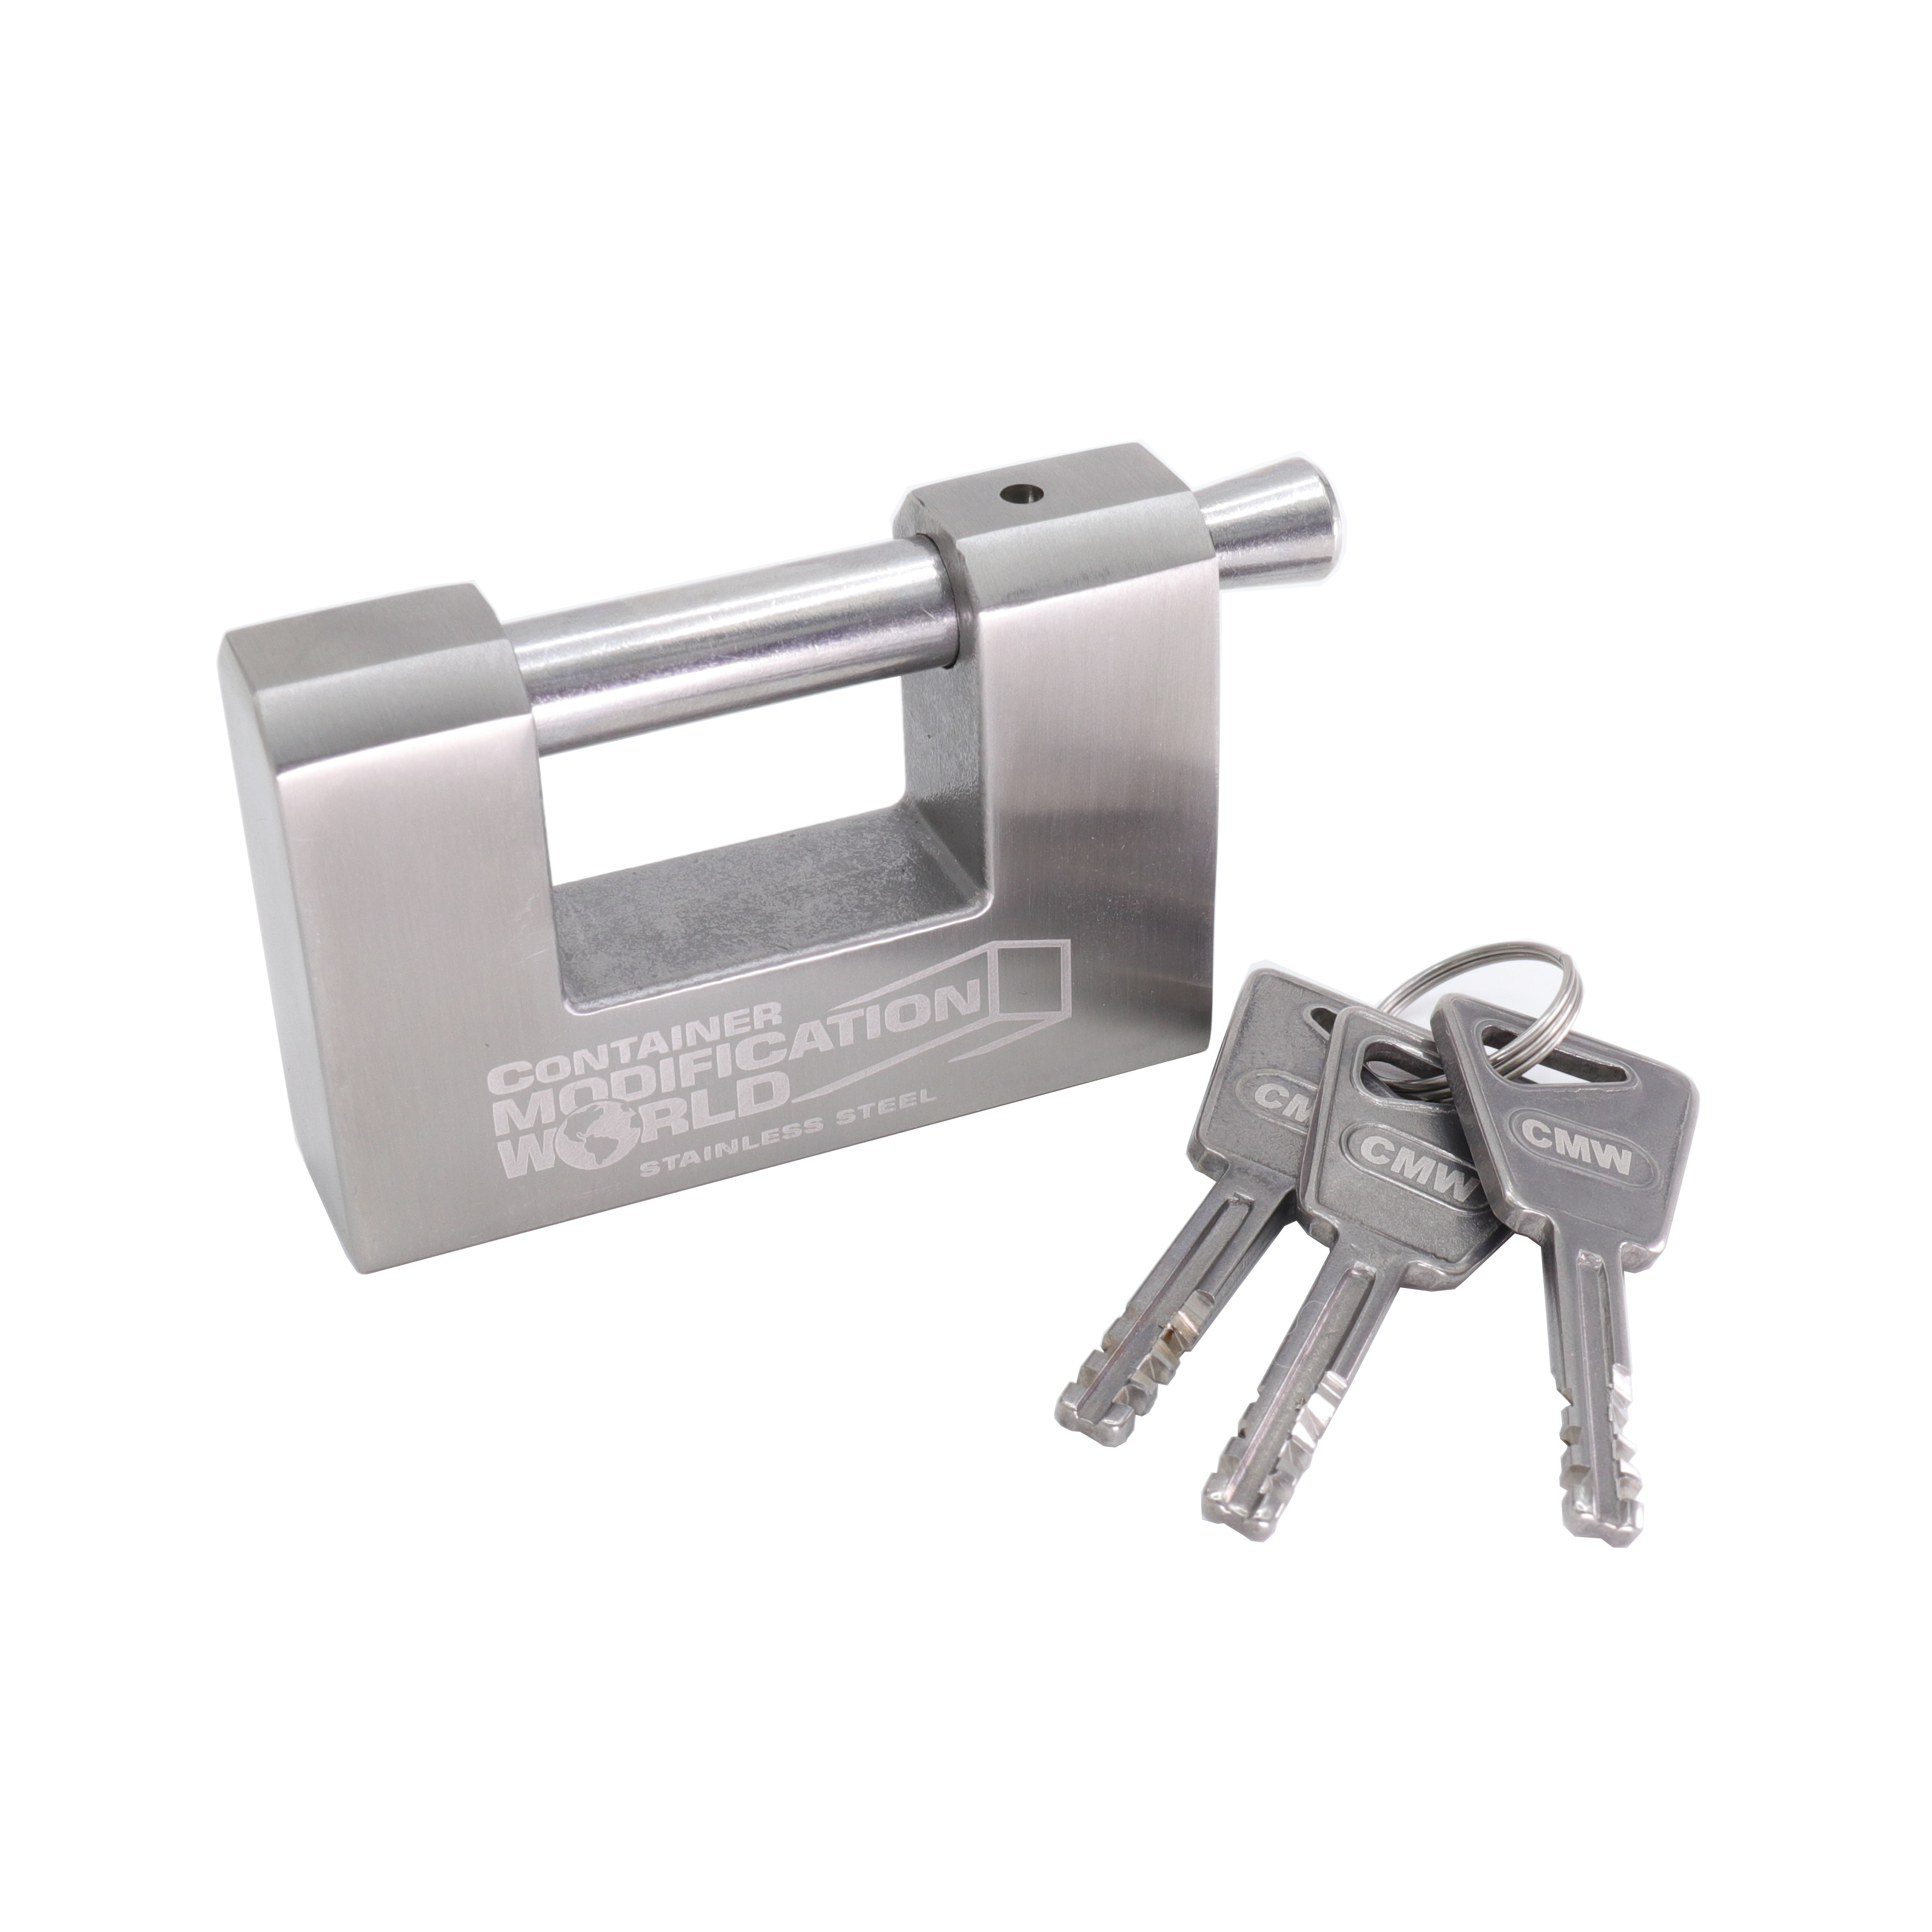 80 mm CWM Shackle Lock for Shipping Containers